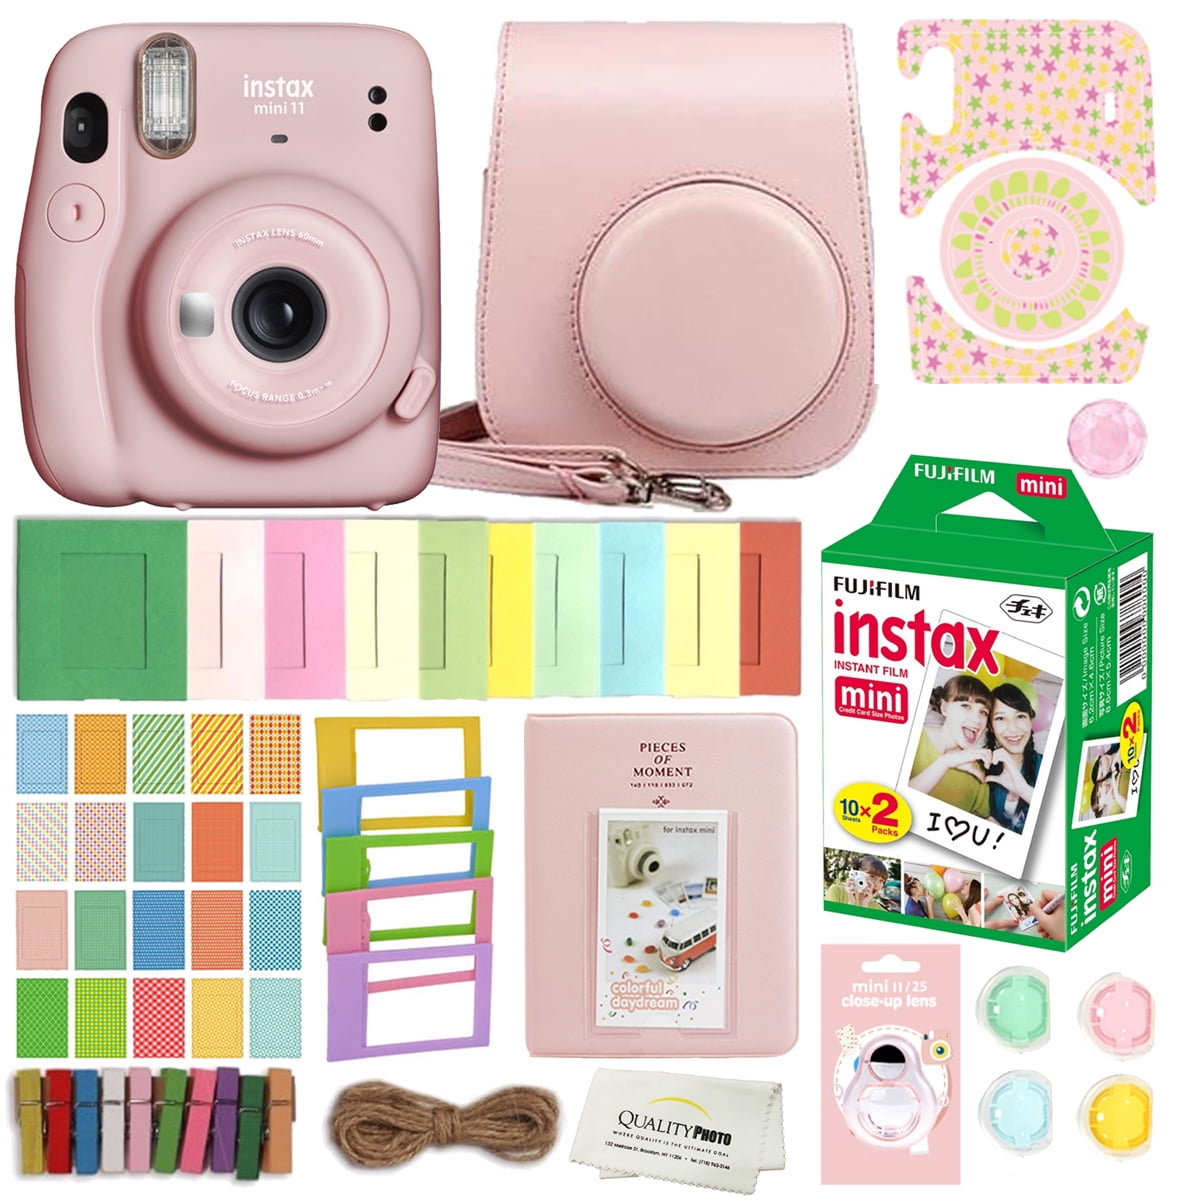 Fujifilm Instax Mini 11 Instant Camera (Blush Pink) With Case, 20 Fujifilm Films and More Accessories with Quality Photo Microfiber Cloth